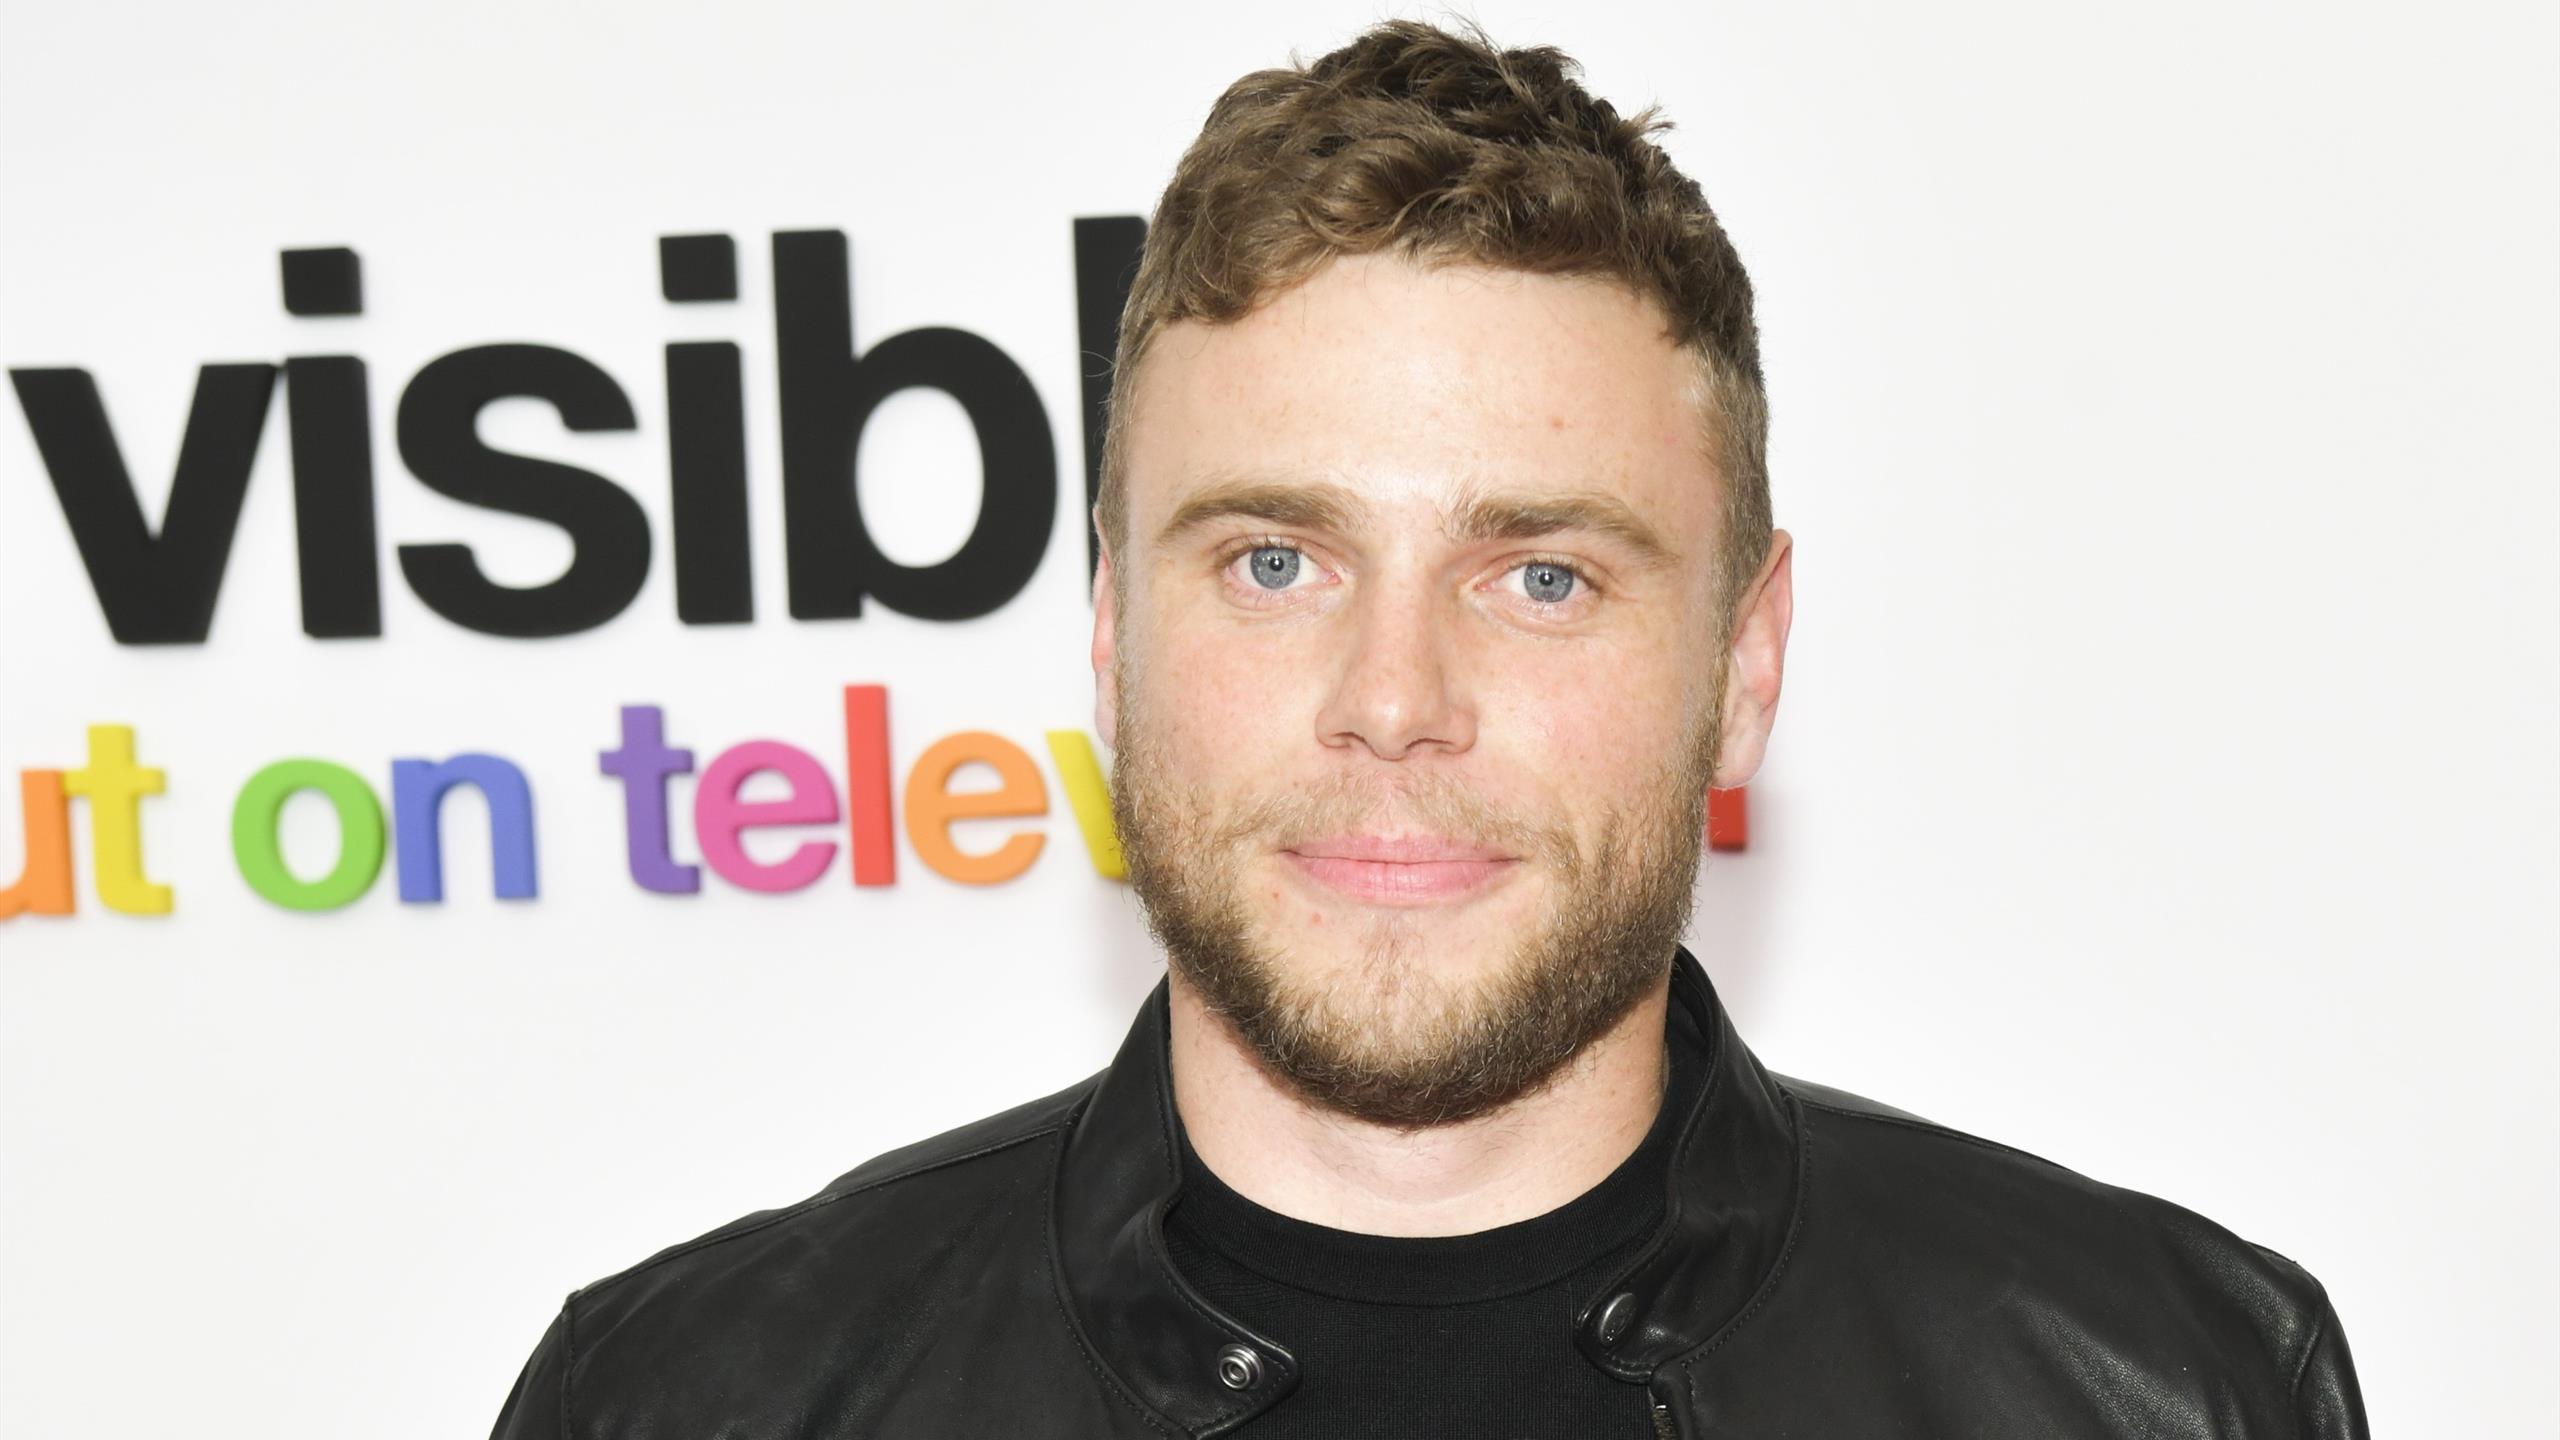 VIDEO: Gus Kenworthy Bears All In Recent MeUndies Ad - Unofficial Networks